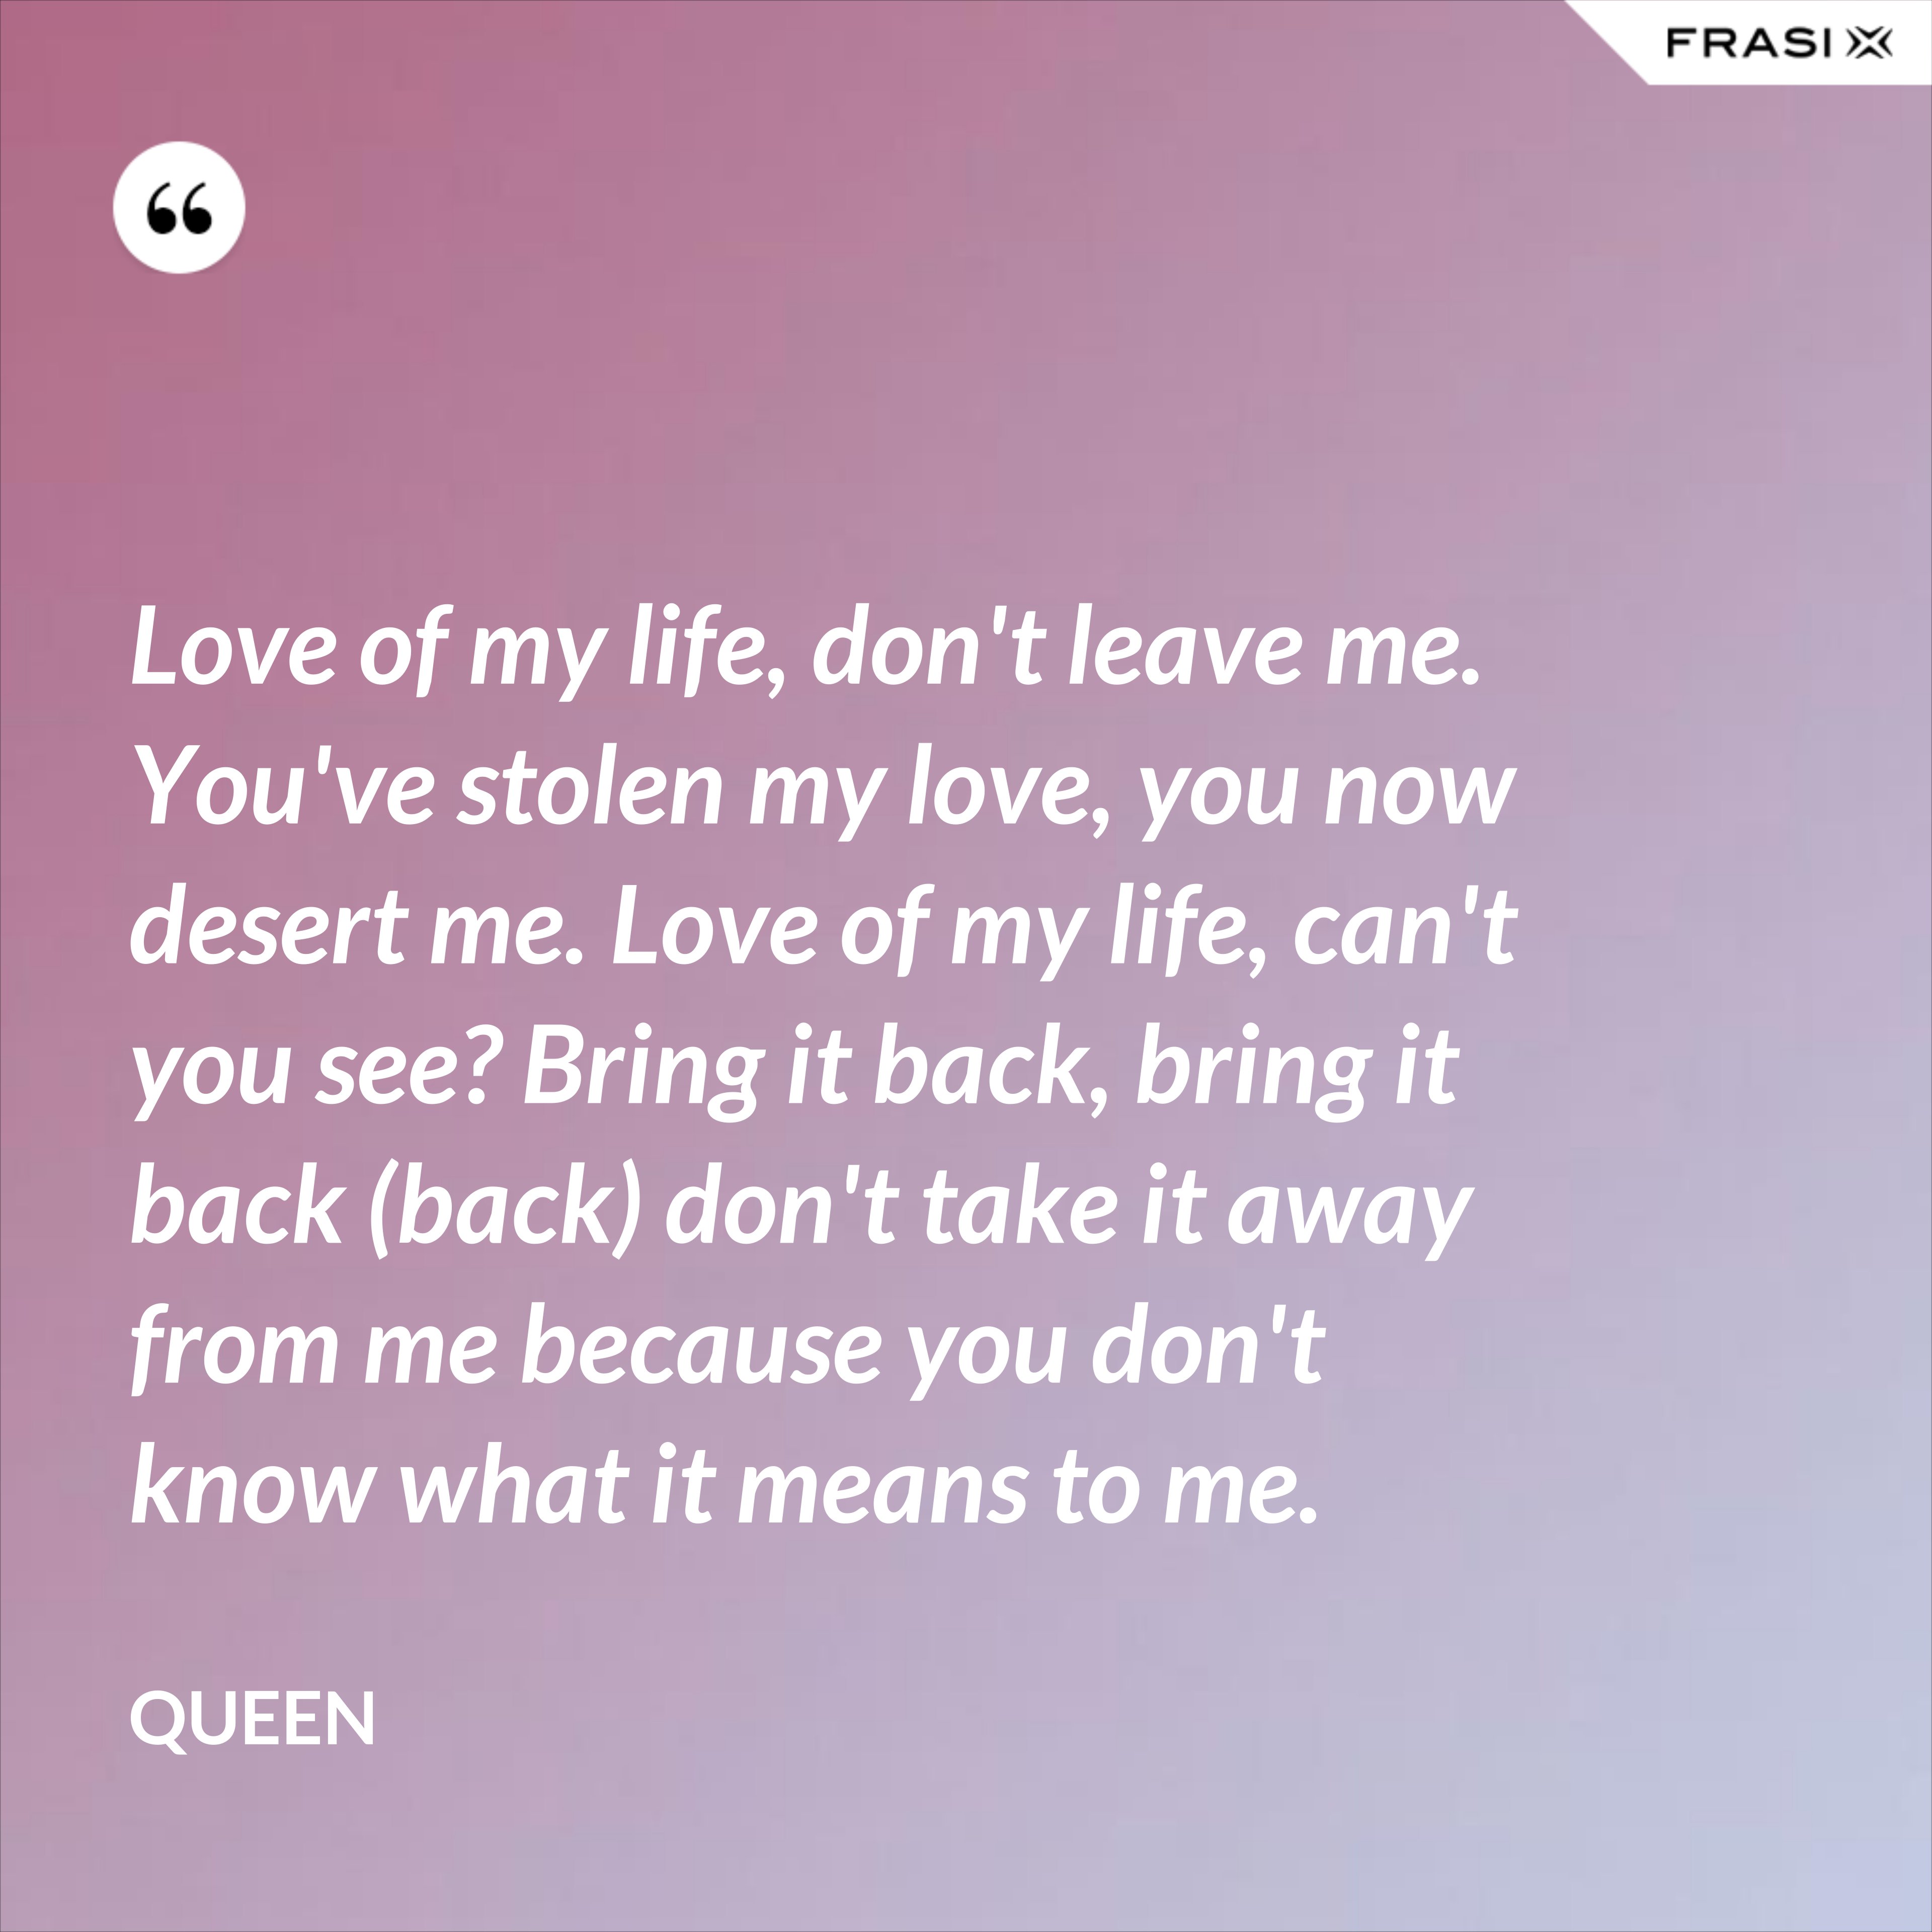 Love of my life, don't leave me. You've stolen my love, you now desert me. Love of my life, can't you see? Bring it back, bring it back (back) don't take it away from me because you don't know what it means to me. - Queen